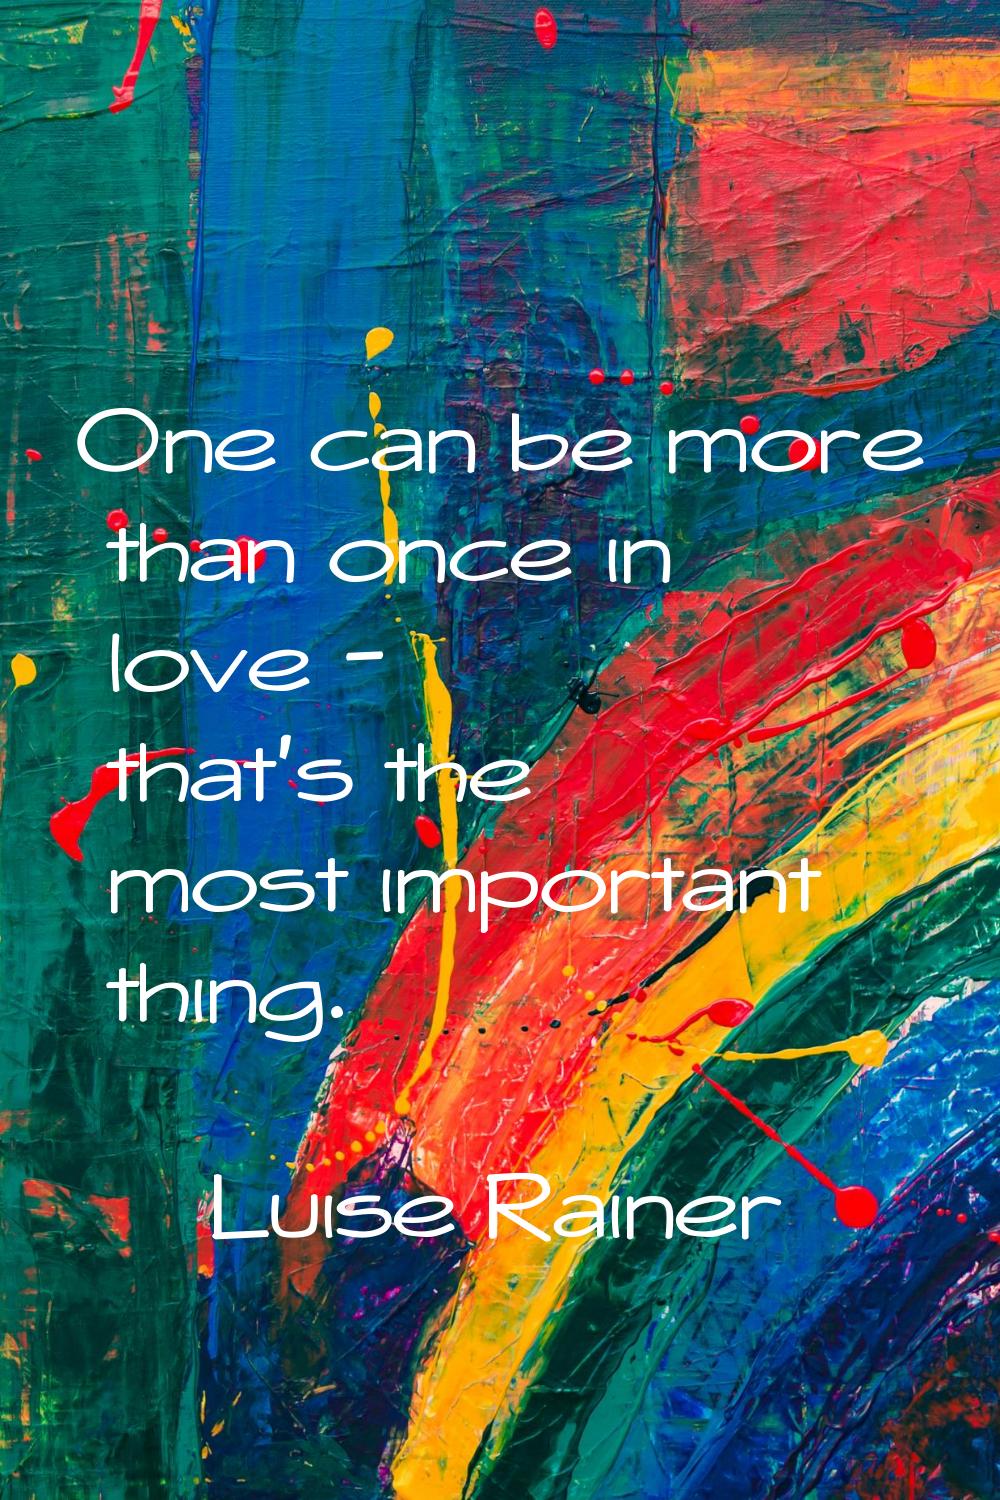 One can be more than once in love - that's the most important thing.